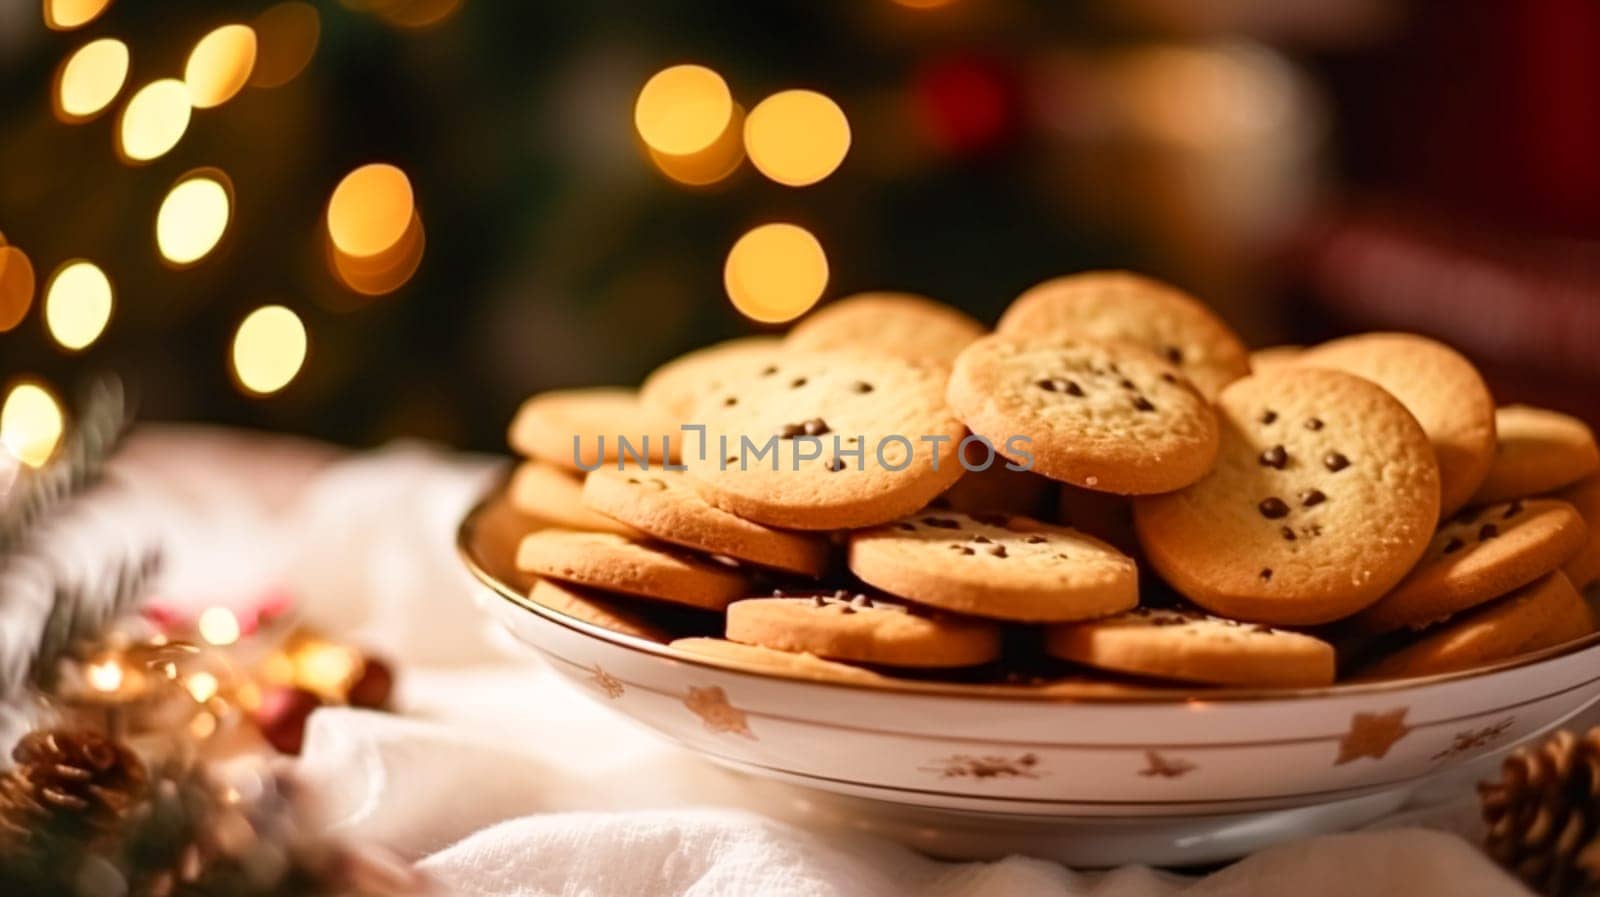 Christmas biscuits, holiday biscuit recipe and home baking, sweet dessert for cosy winter English country tea in the cottage, homemade food and cooking by Anneleven